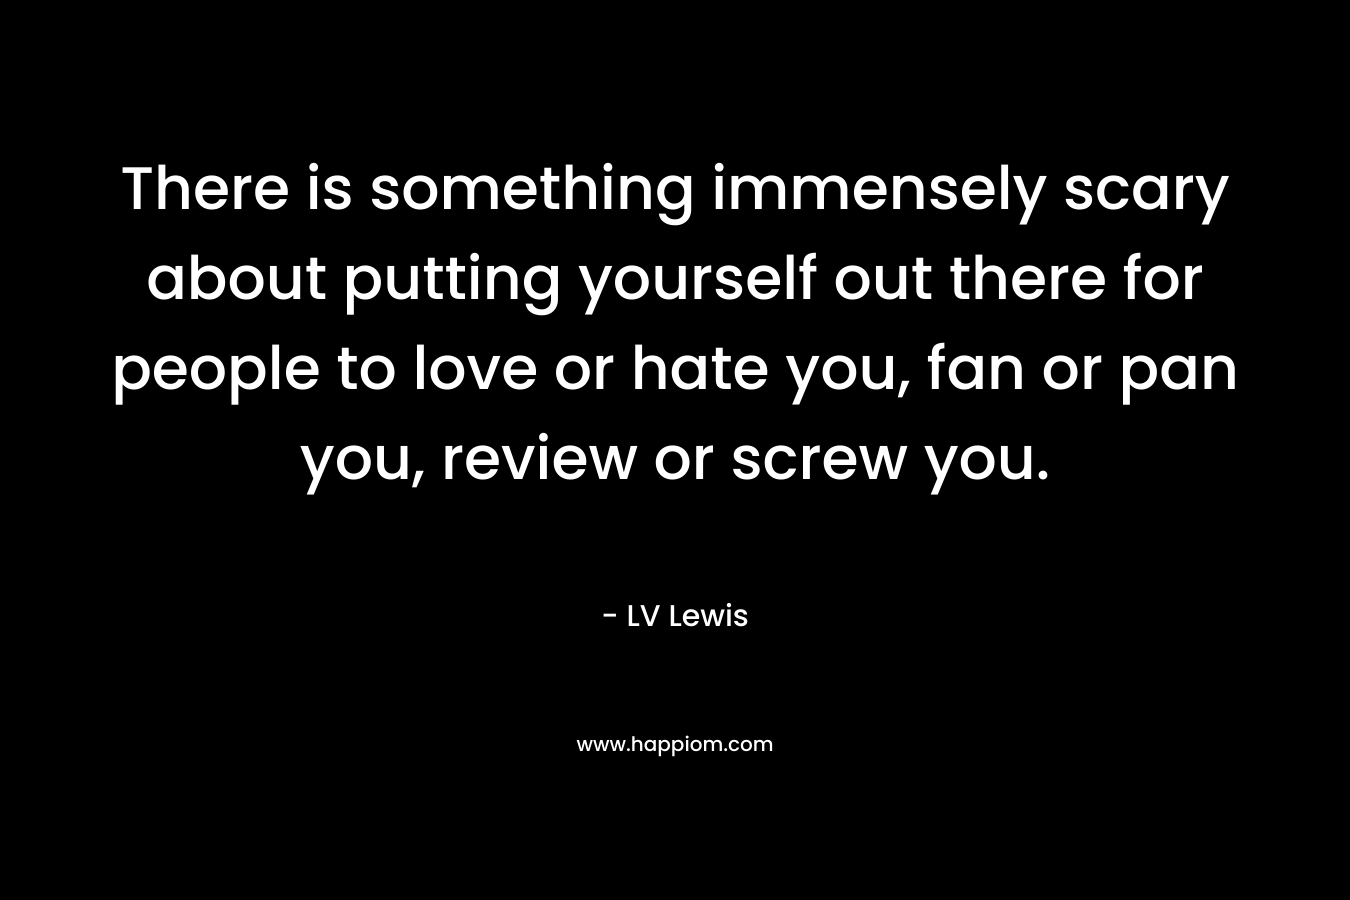 There is something immensely scary about putting yourself out there for people to love or hate you, fan or pan you, review or screw you. – LV Lewis